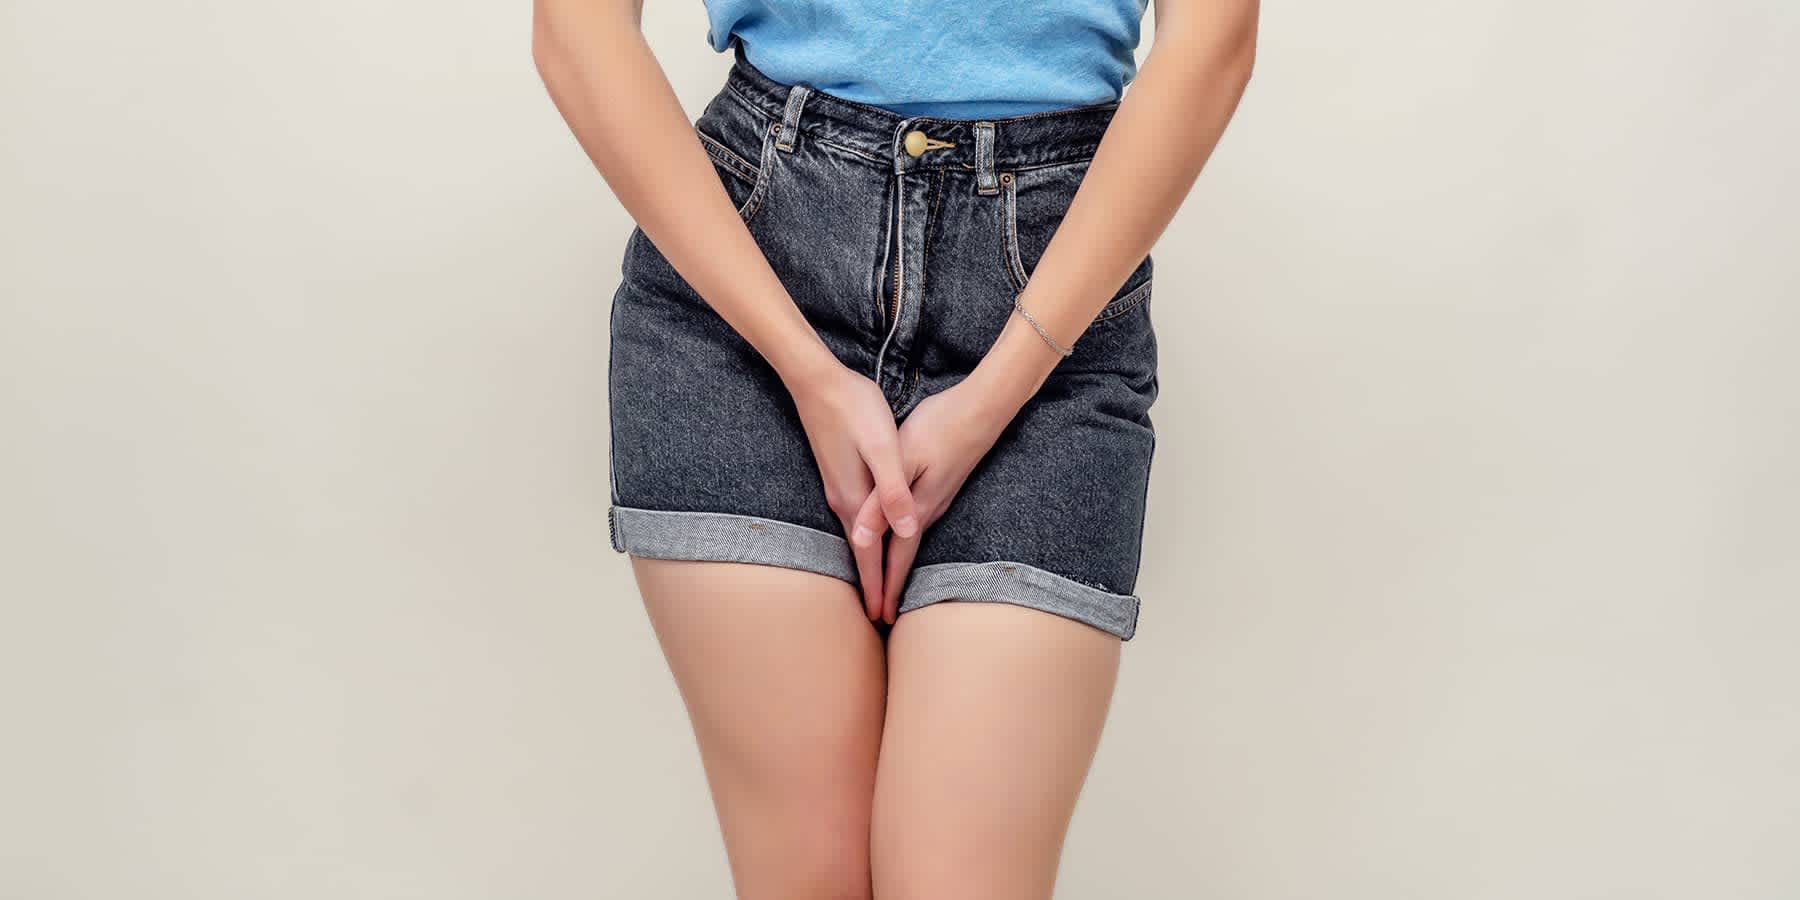 Woman in shorts with hands over groin wondering if a yeast infection can cause bleeding